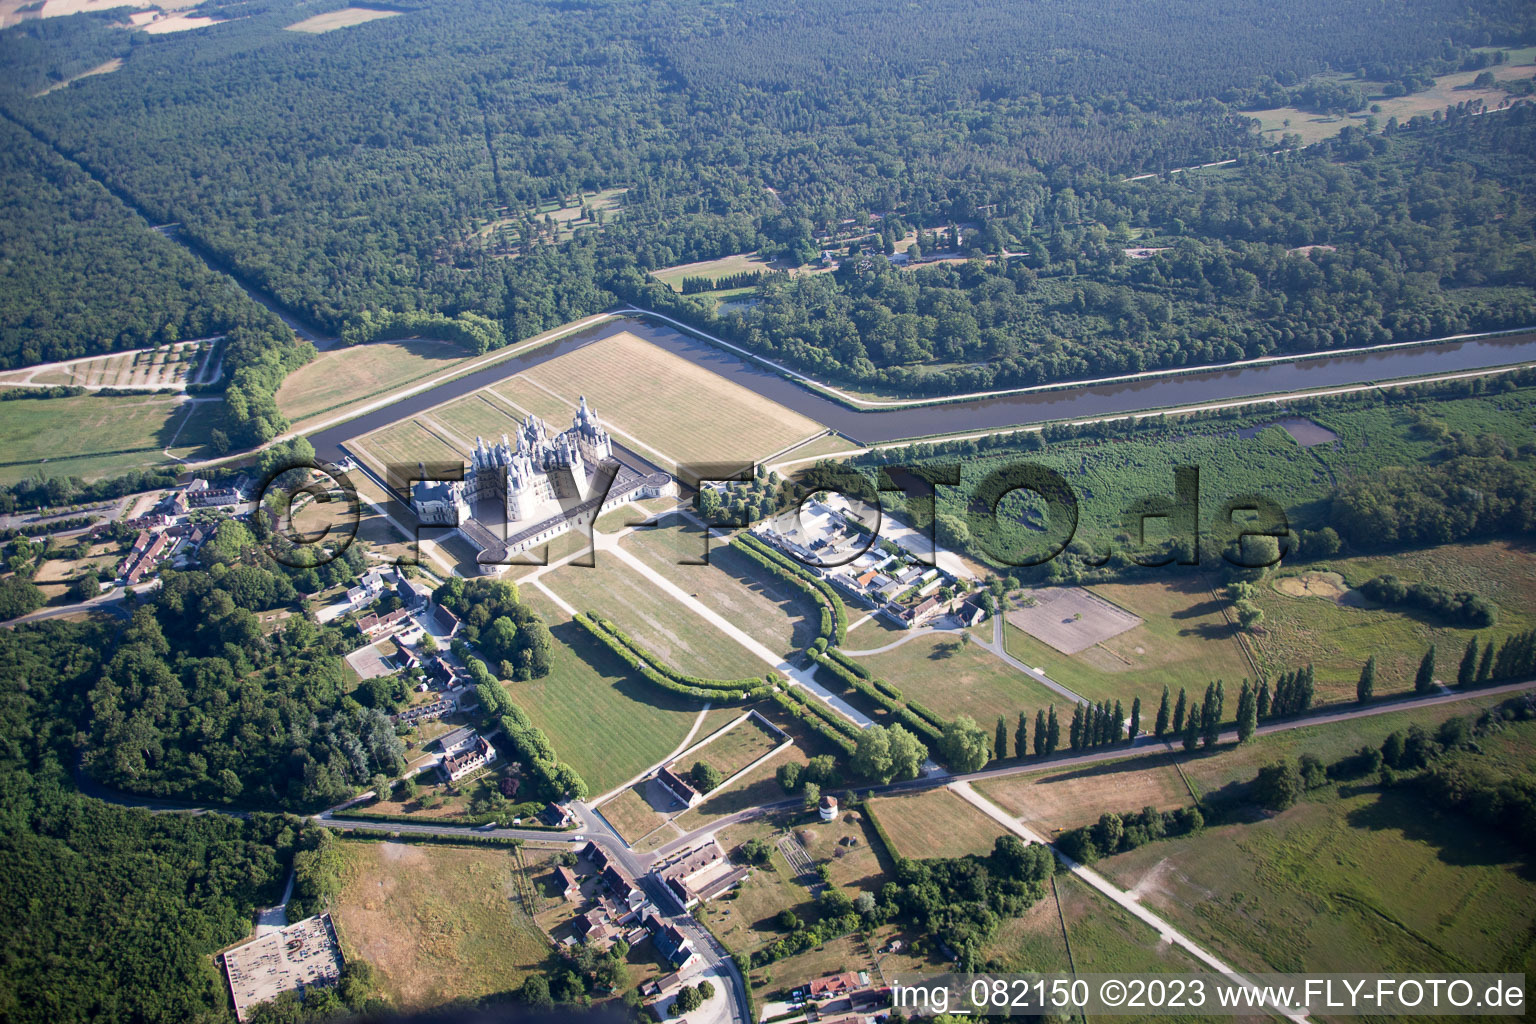 Chambord in the state Loir et Cher, France out of the air